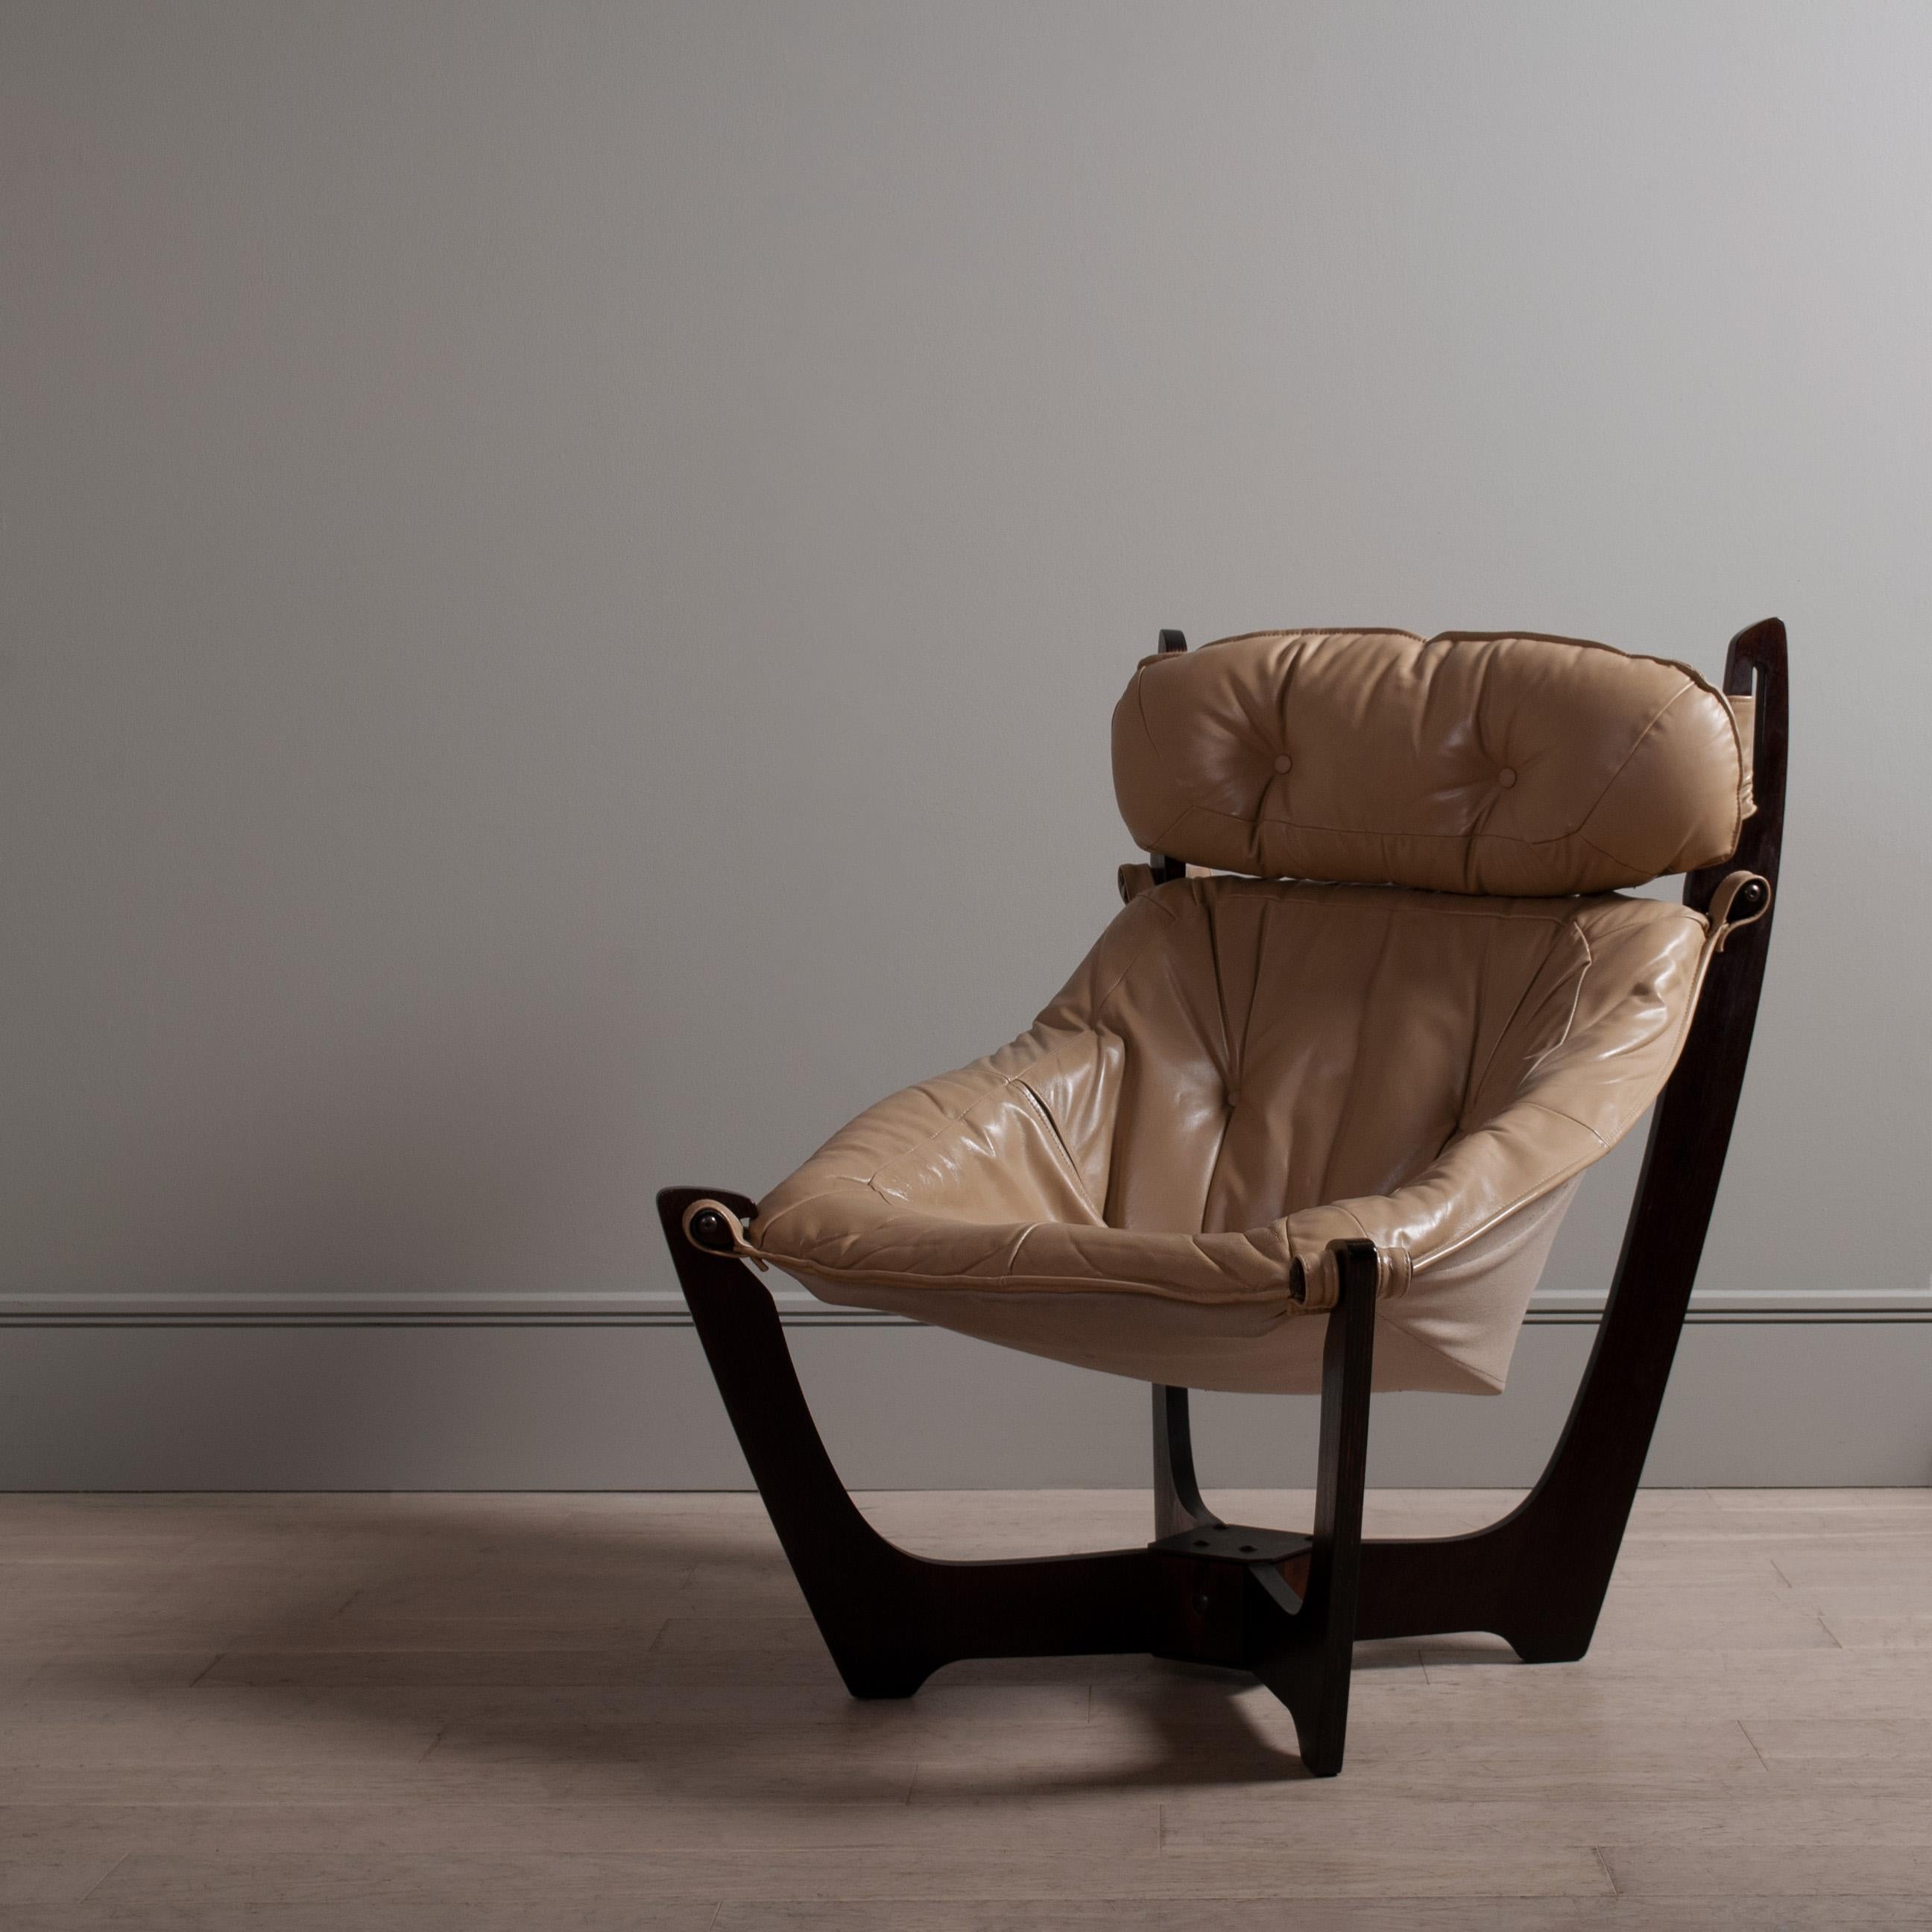 Incredible space age lounge chair by Norwegian designer Odd Knutsen. The Luna chair is a wonderful and unique design that suspends the sitter within the wooden frame. A genius and complex design. The upholstery is leather and the frame a dark